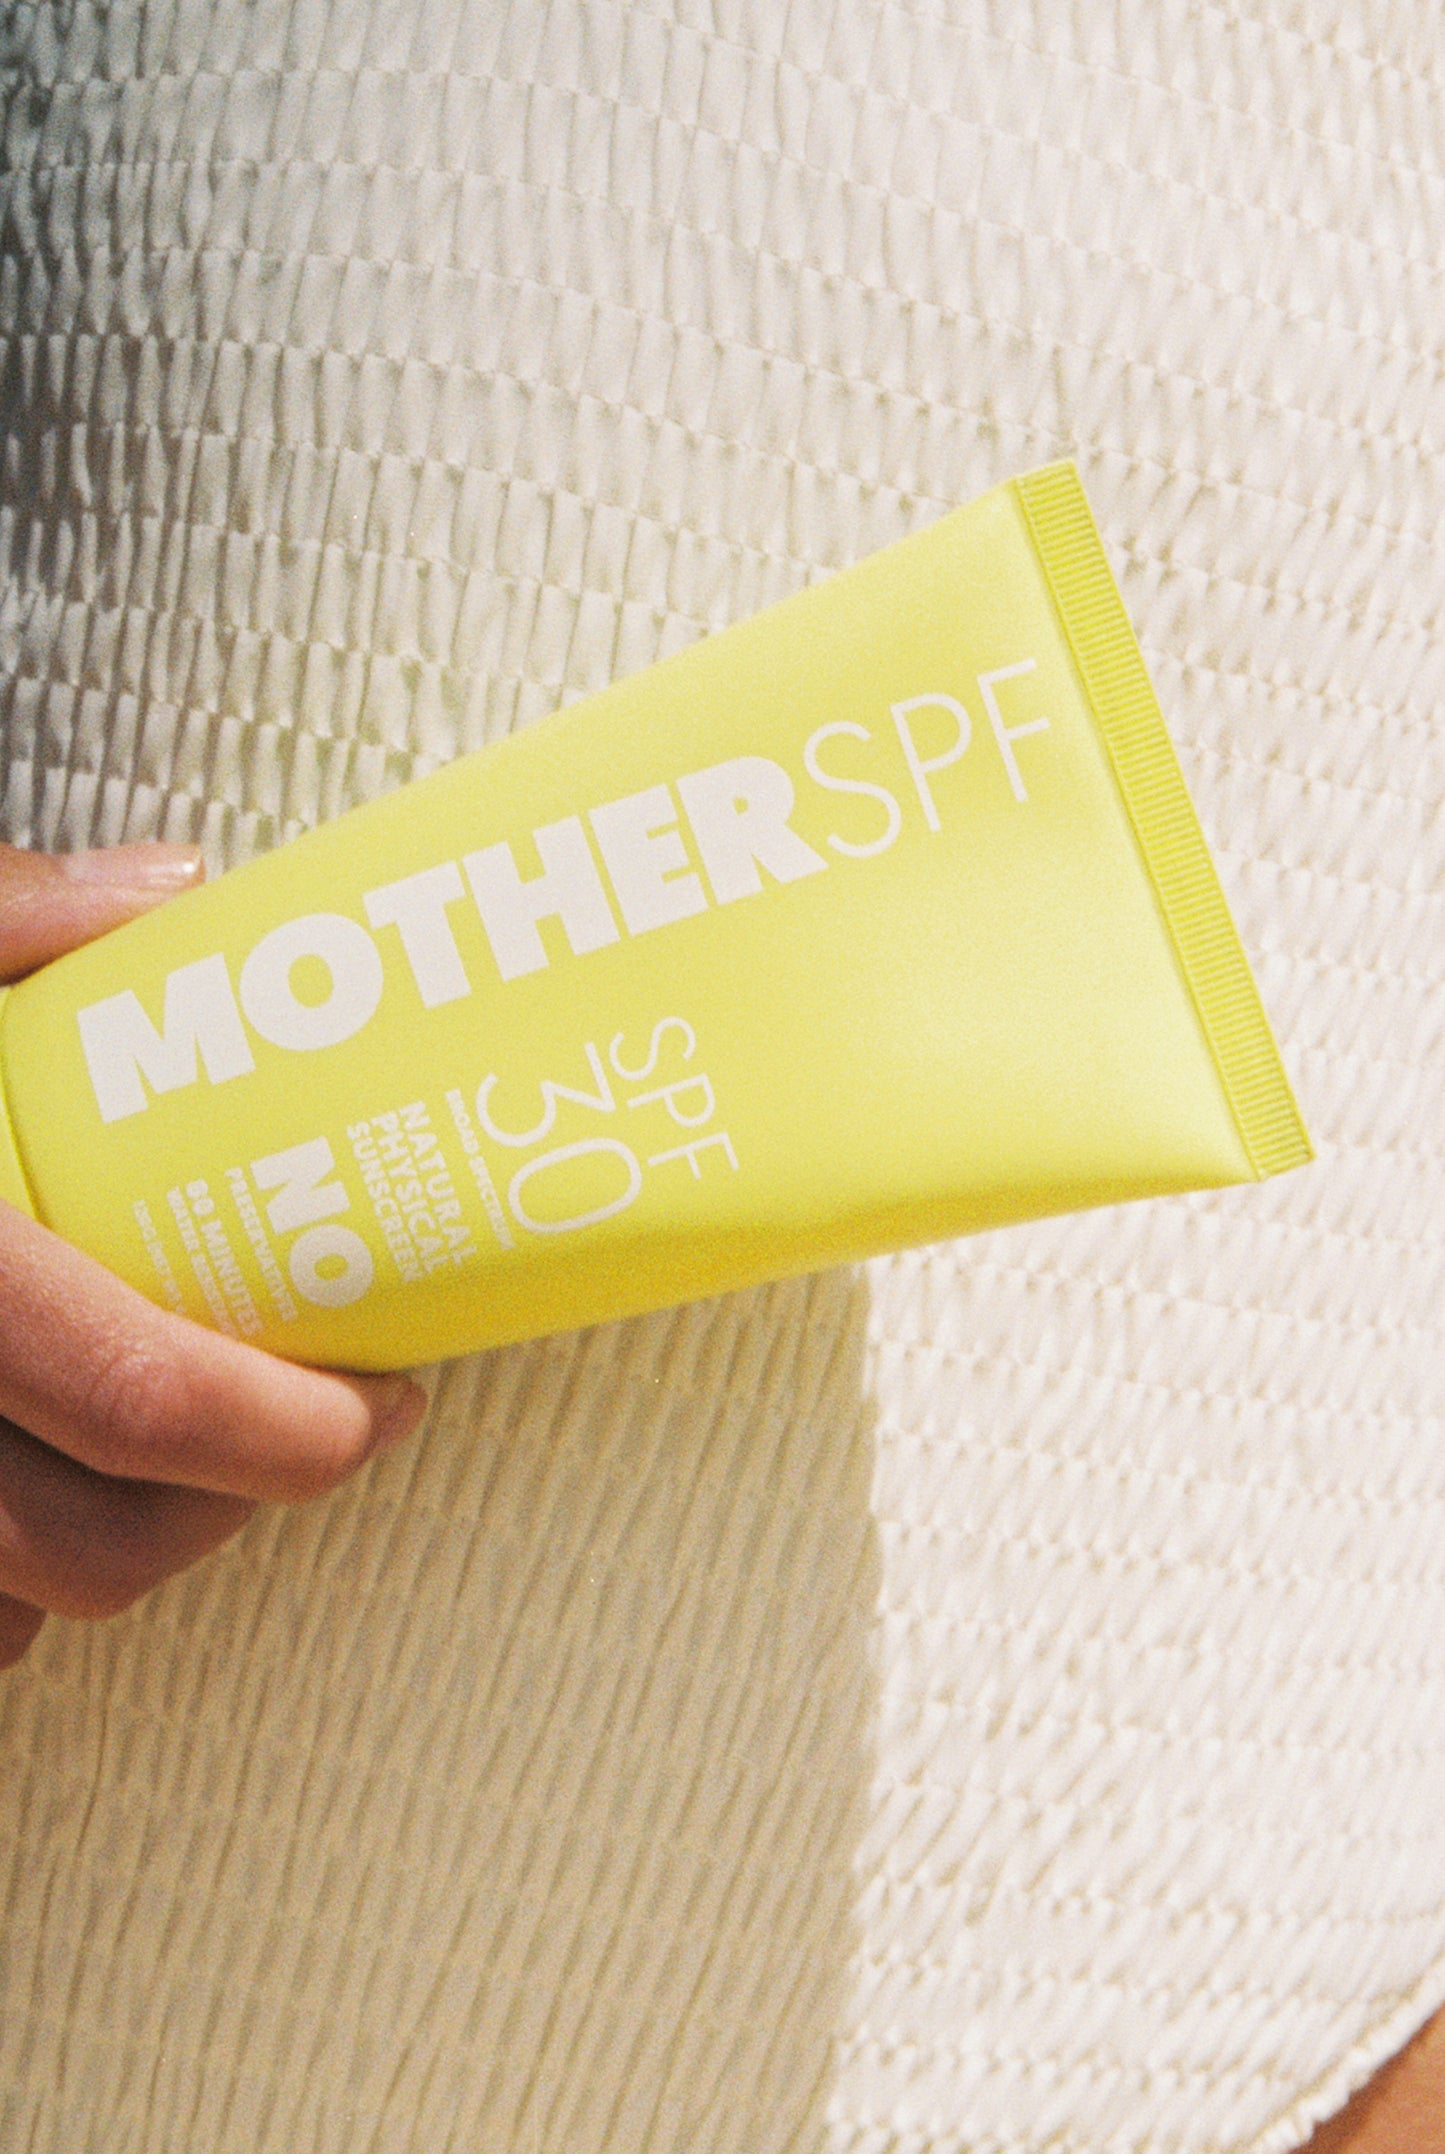 MOTHER SPF30